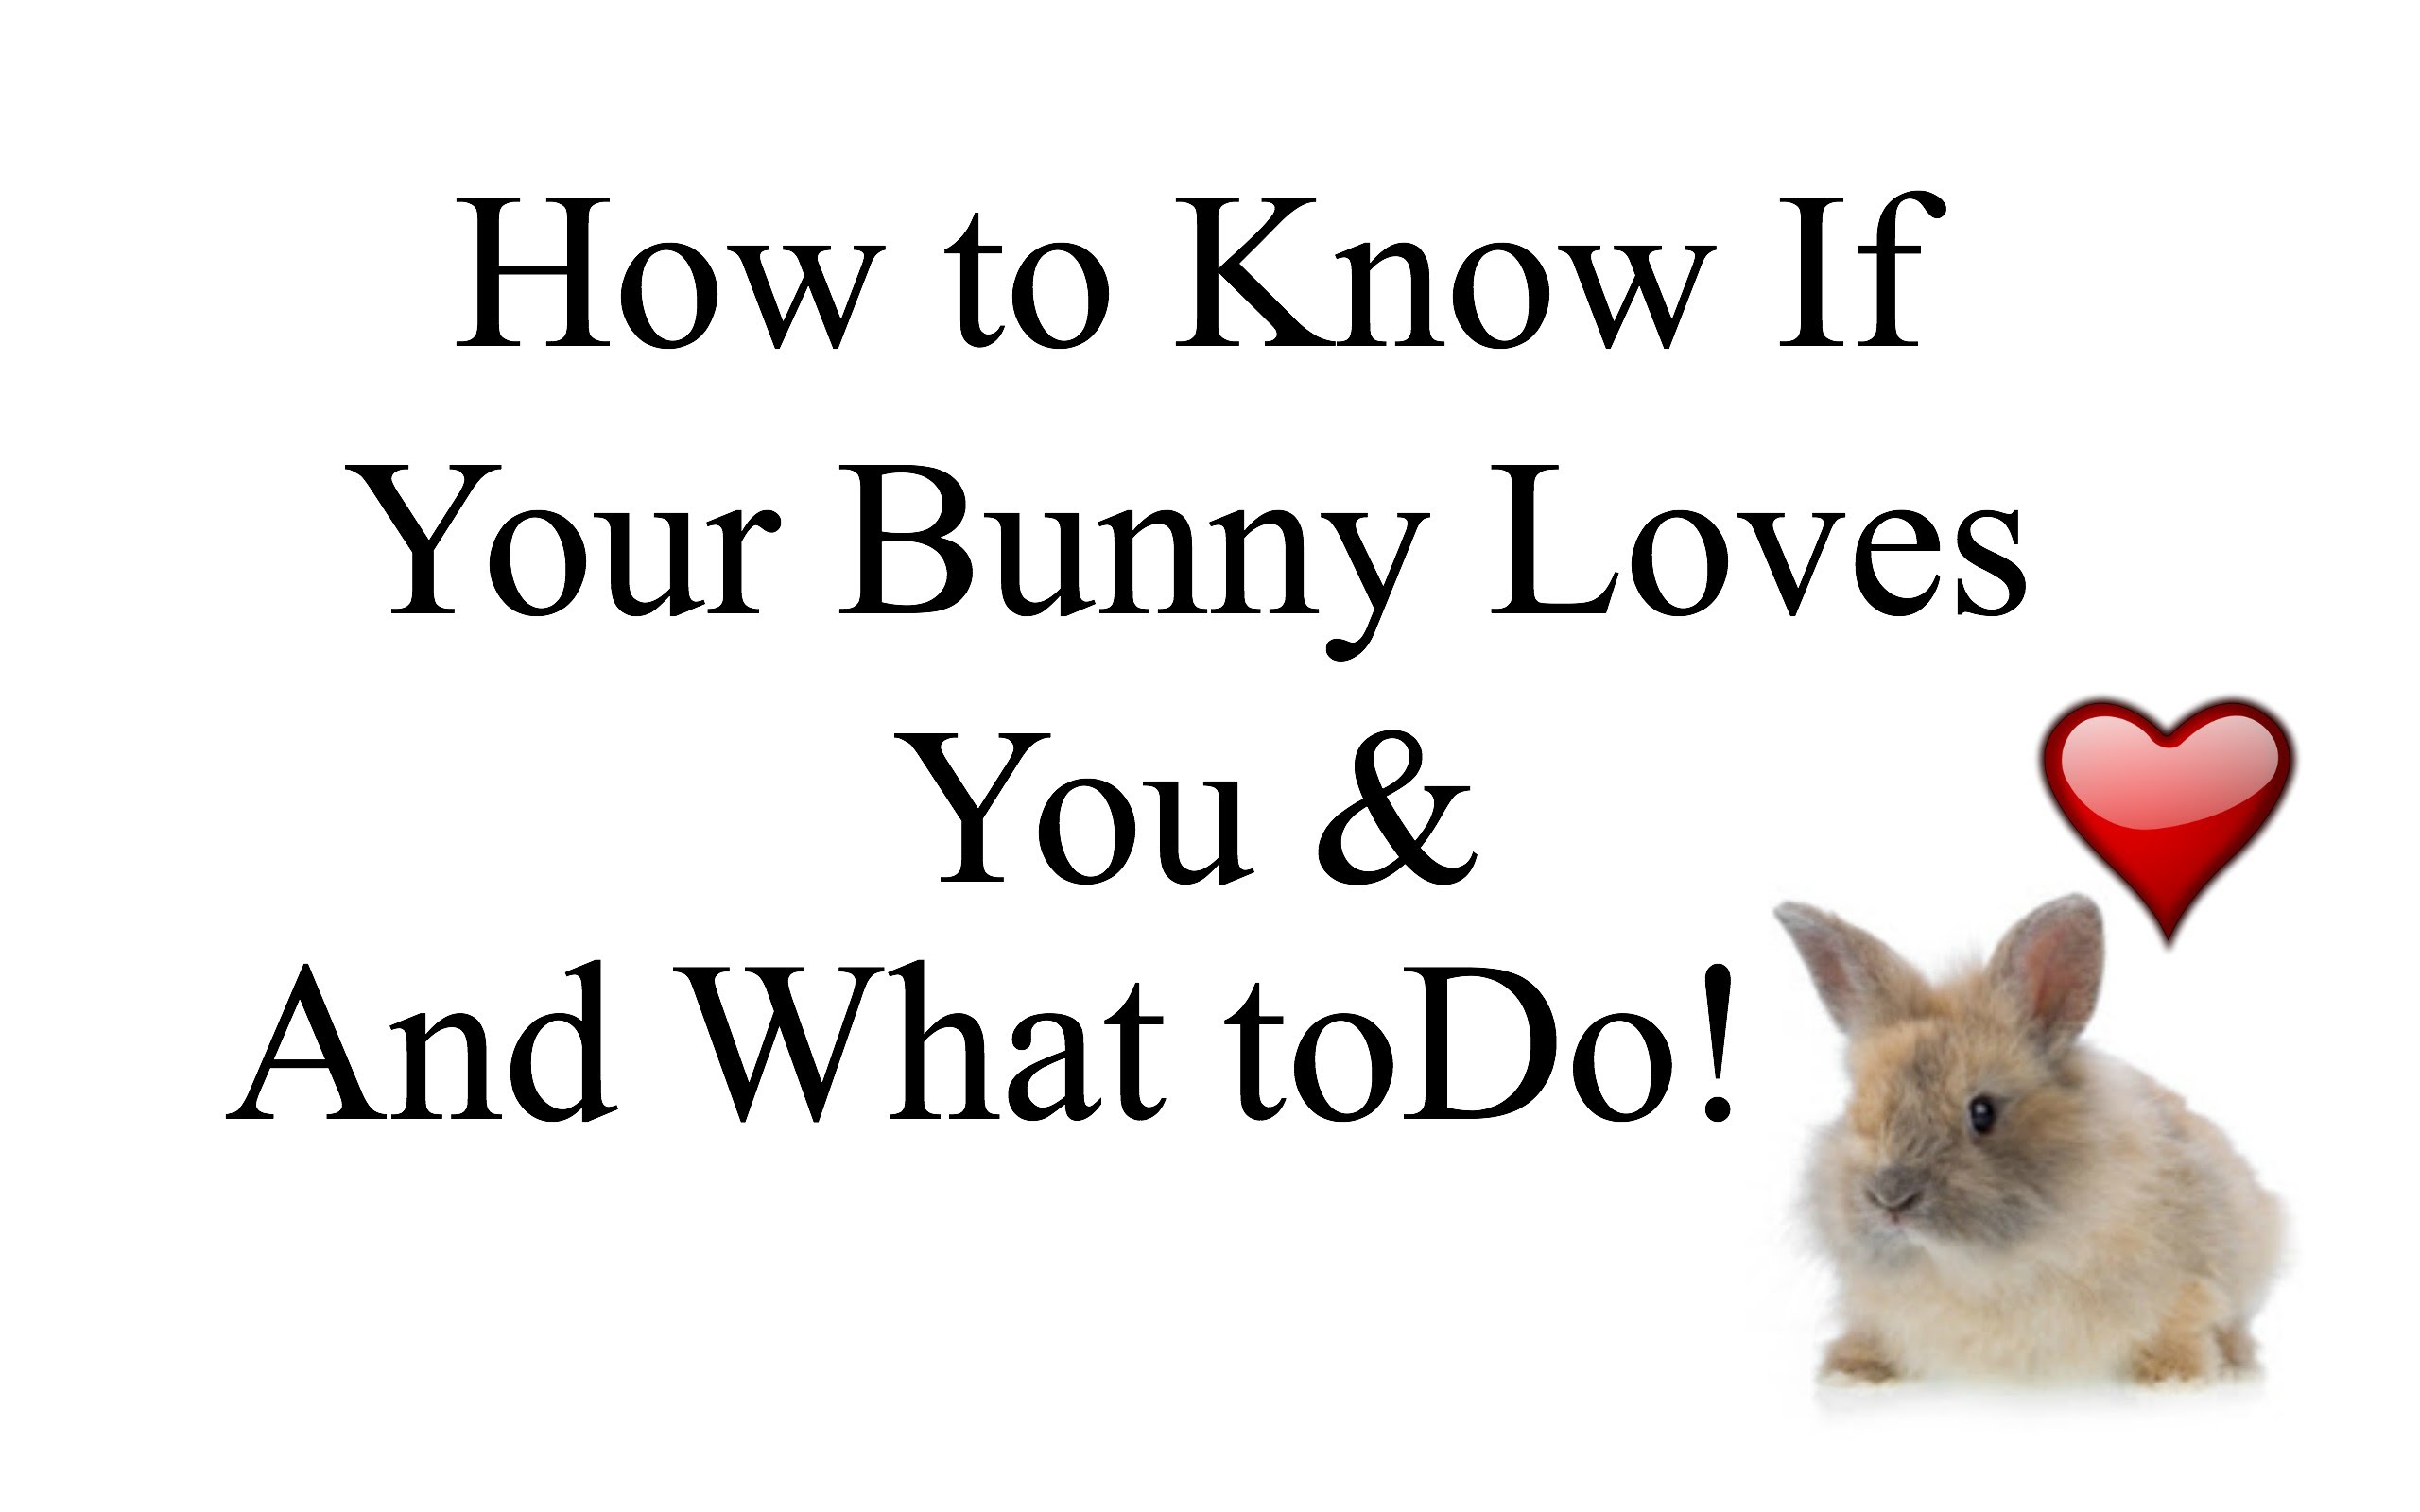 How to Know if Your Bunny Loves You, What to do and CARE TIPS - YouTube